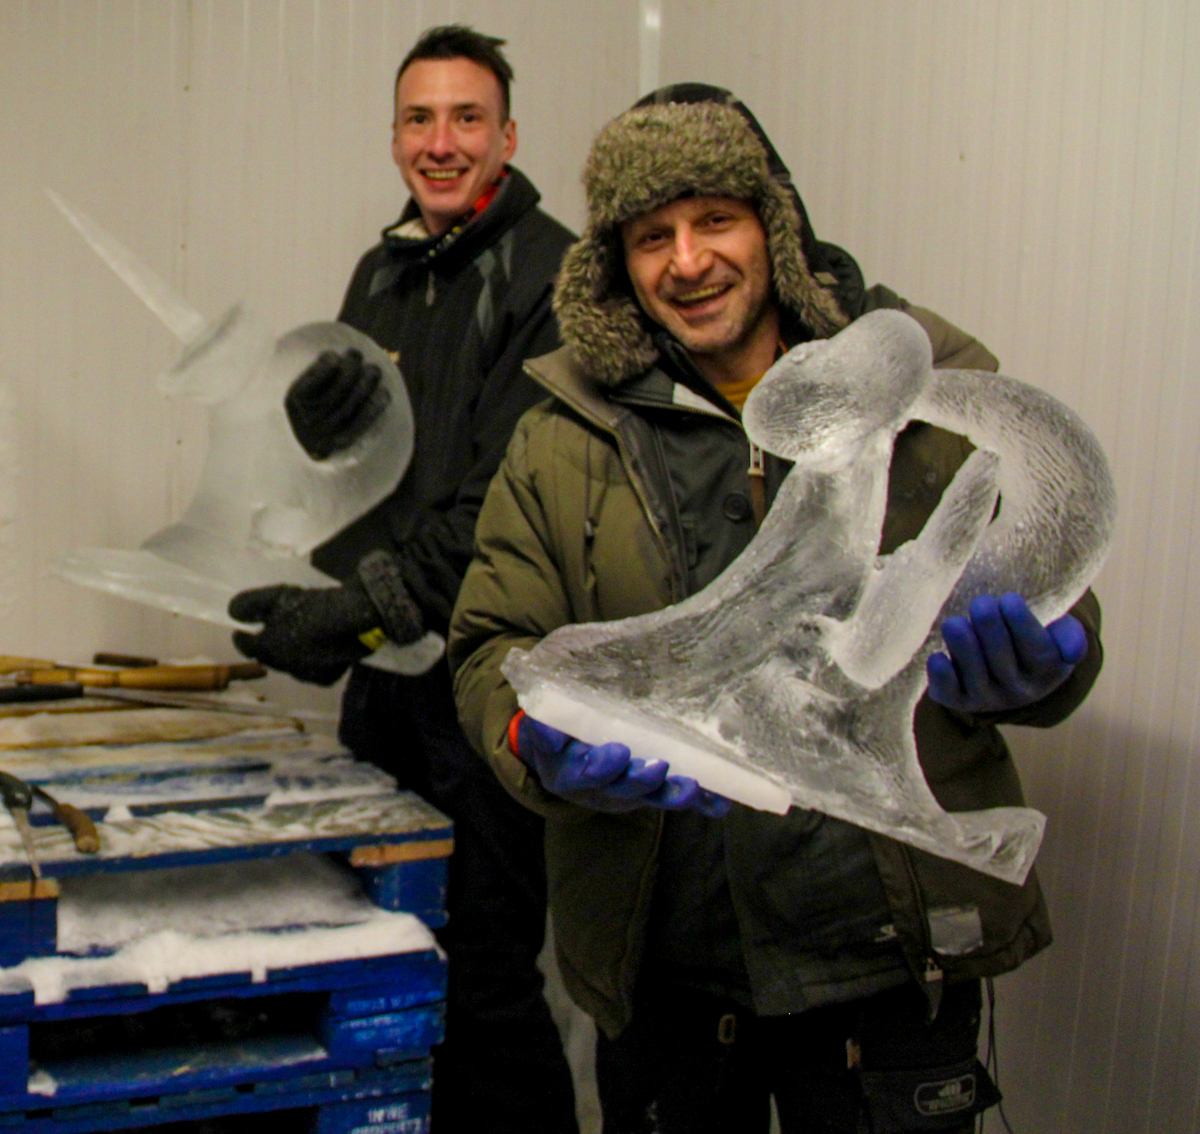 ice_sculpture_experience_day_corporate_team_building_events_yorkshire_lancashire-2